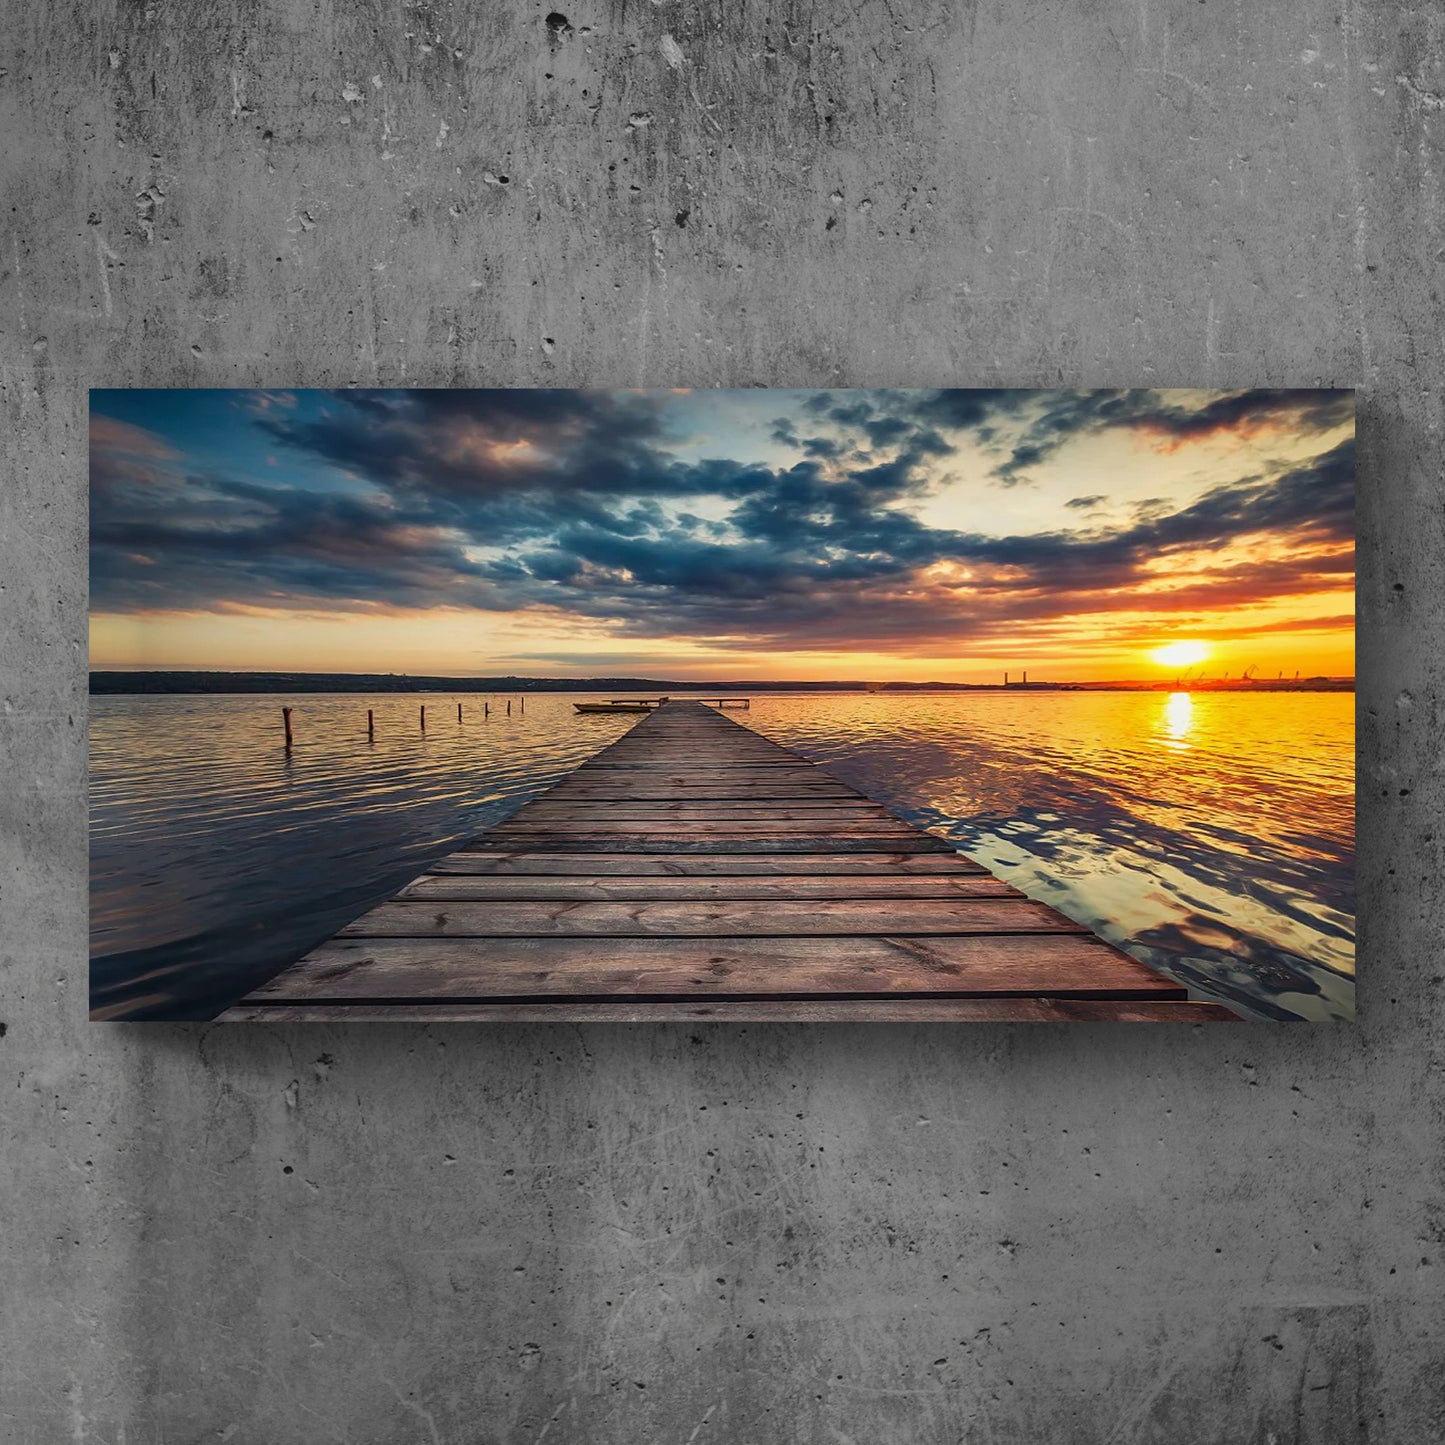 Small Dock By The Vibrant Lake Canvas Wall Art (Free Shipping)